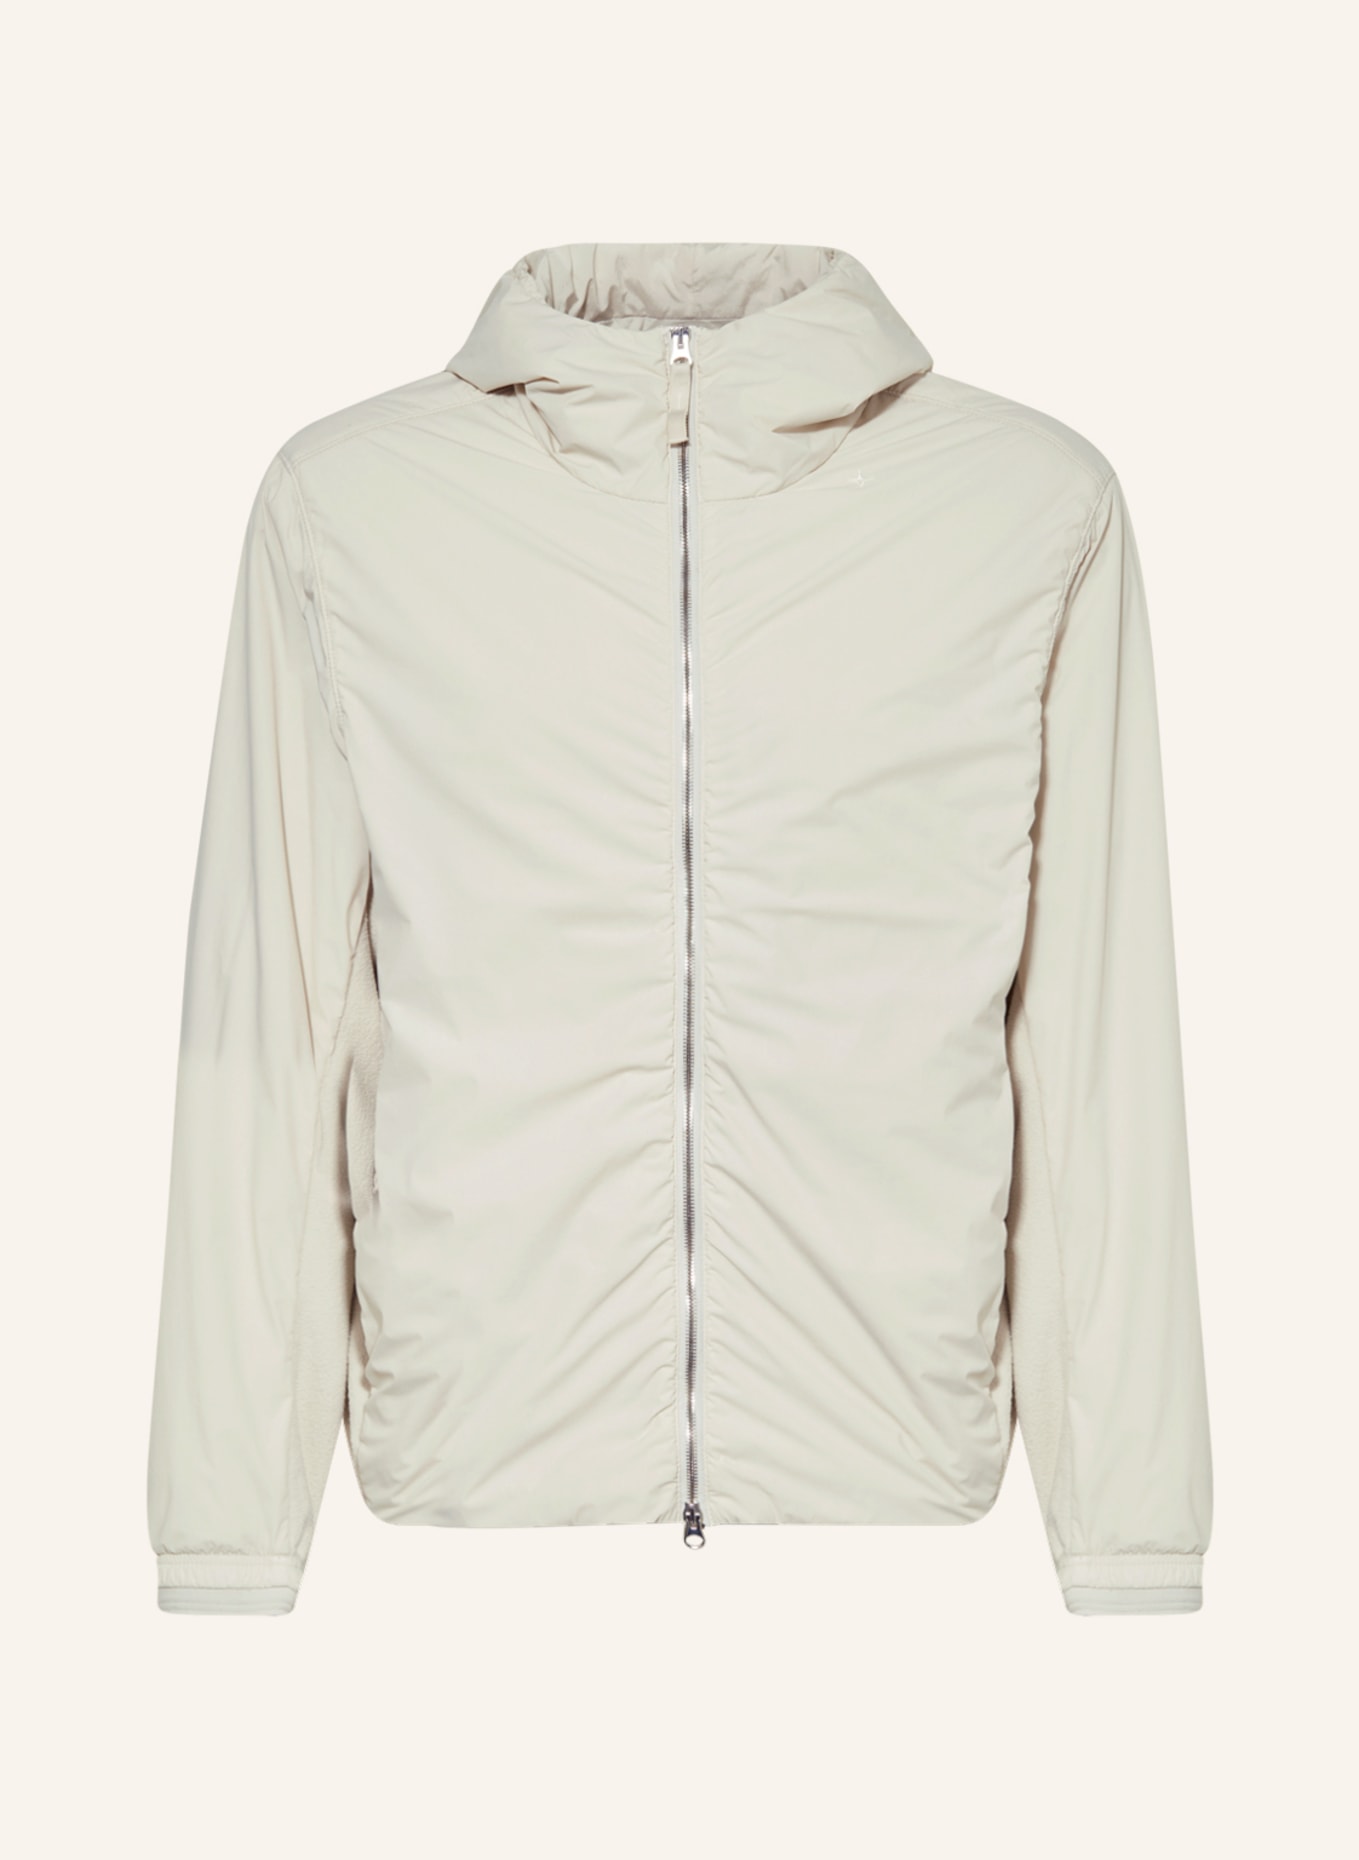 STONE ISLAND Jacket in mixed materials, Color: ECRU (Image 1)